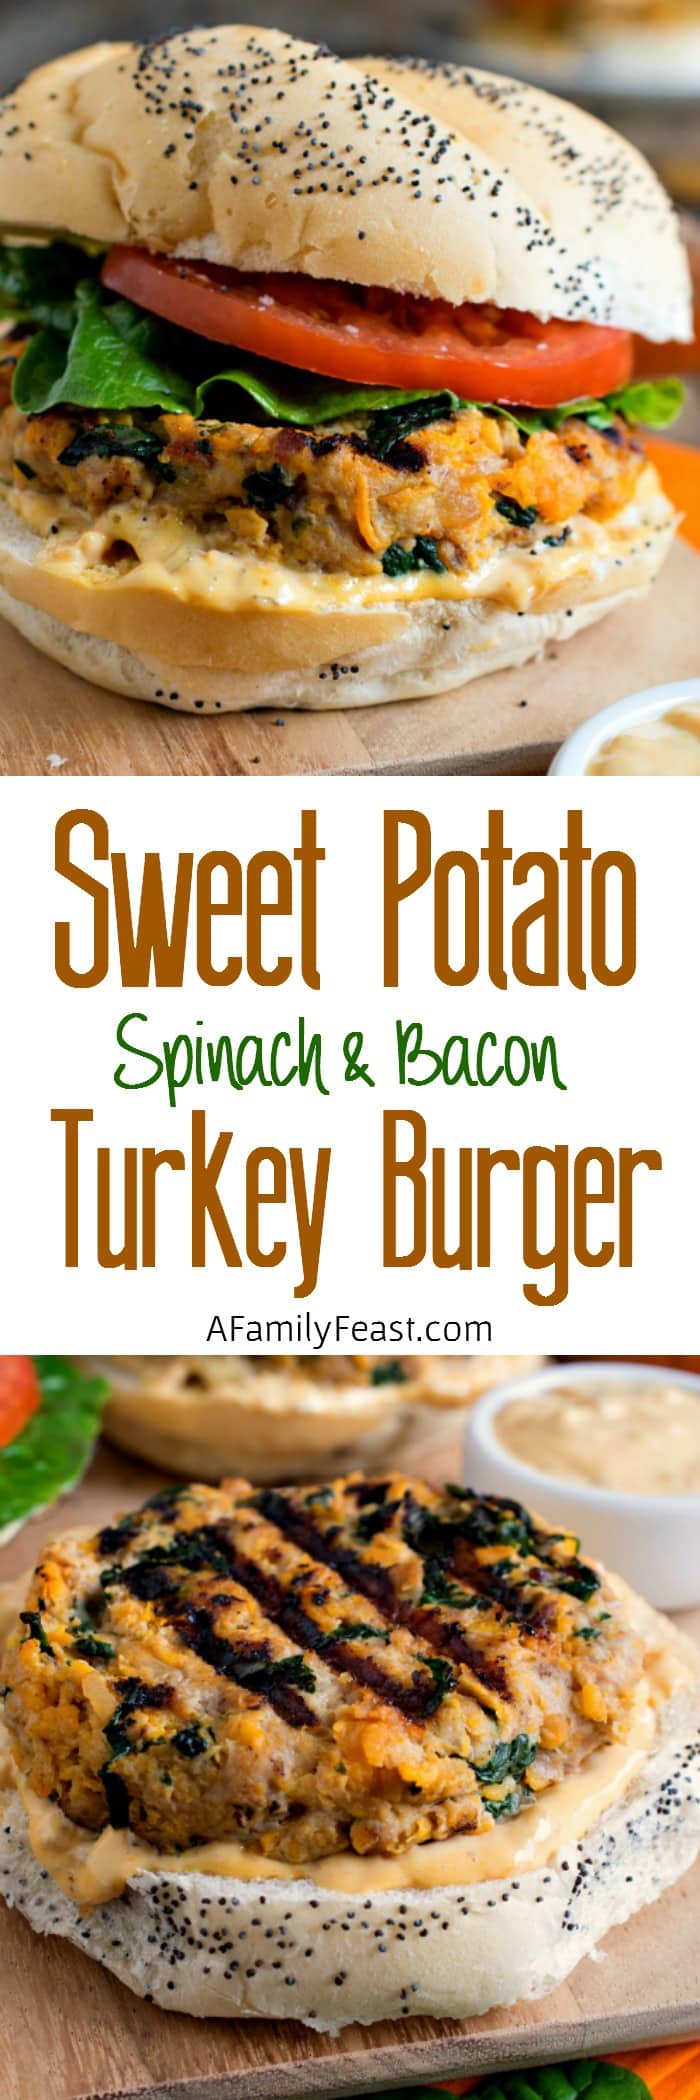 Sweet Potato Spinach and Bacon Turkey Burgers - Moist and full of fantastic flavors! These are the best turkey burgers around!